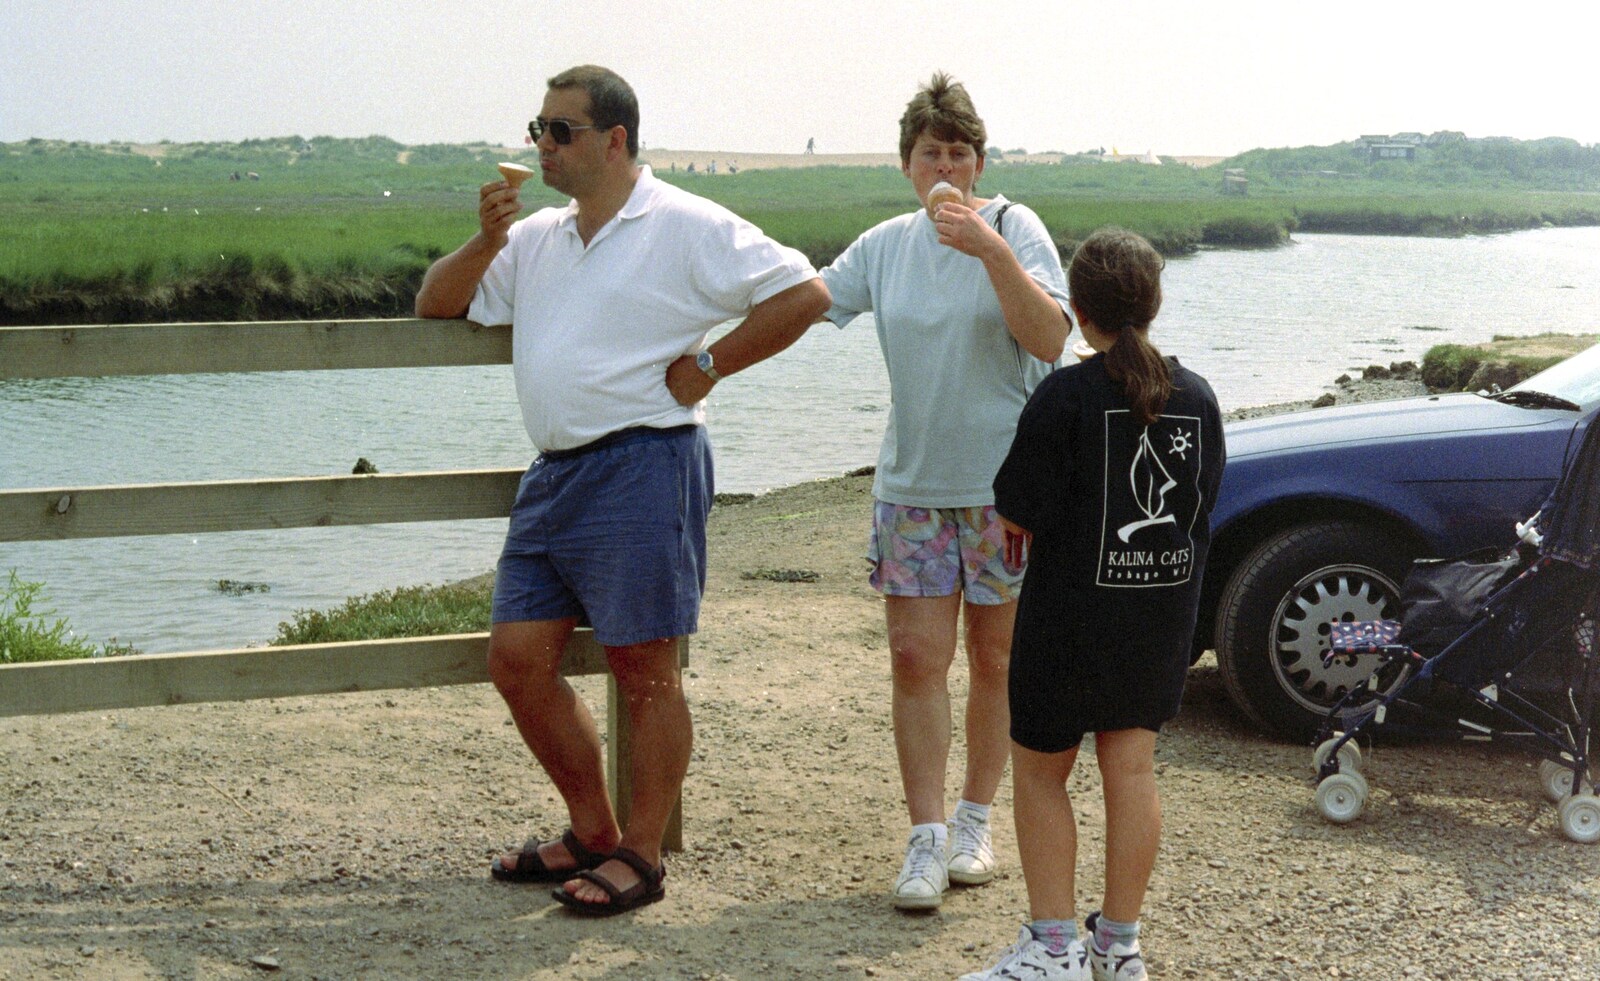 Roger, Pippa and Hannah eat ice cream from BSCC at the Beach, Walberswick, Suffolk - 15th July 1997